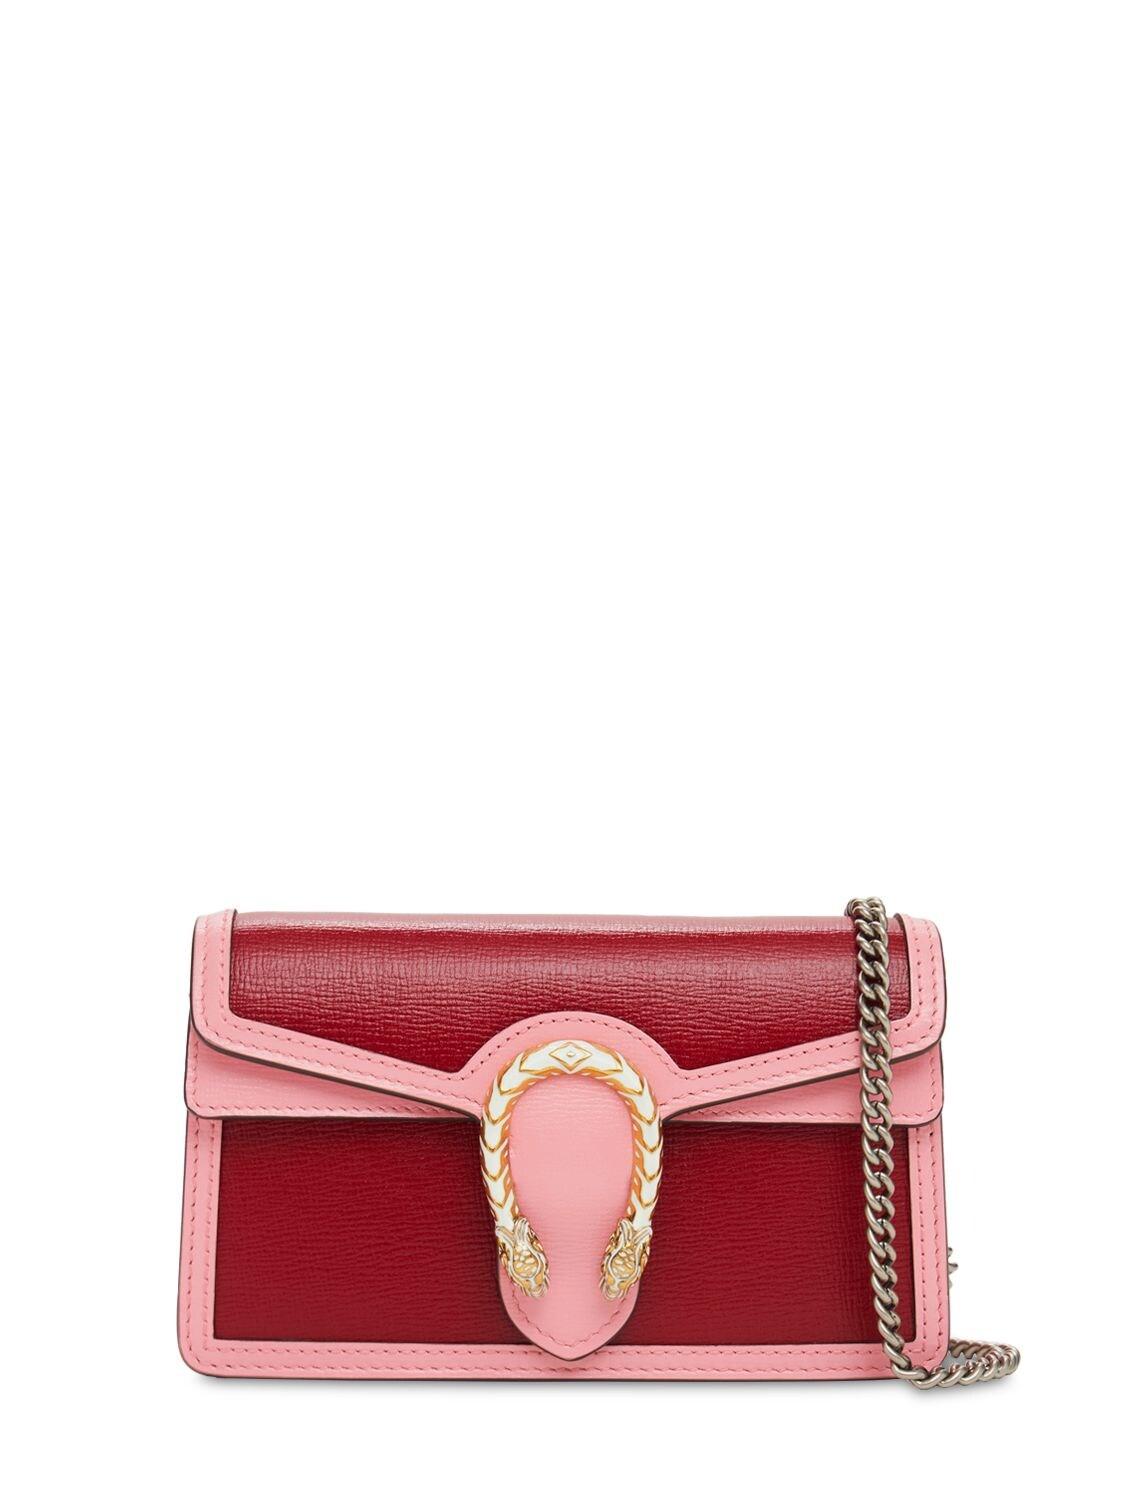 (WMNS) Gucci Dionysus Series Leather Bag Single-Shoulder Bag Mini-Size Red 476432-CAOGX-8990